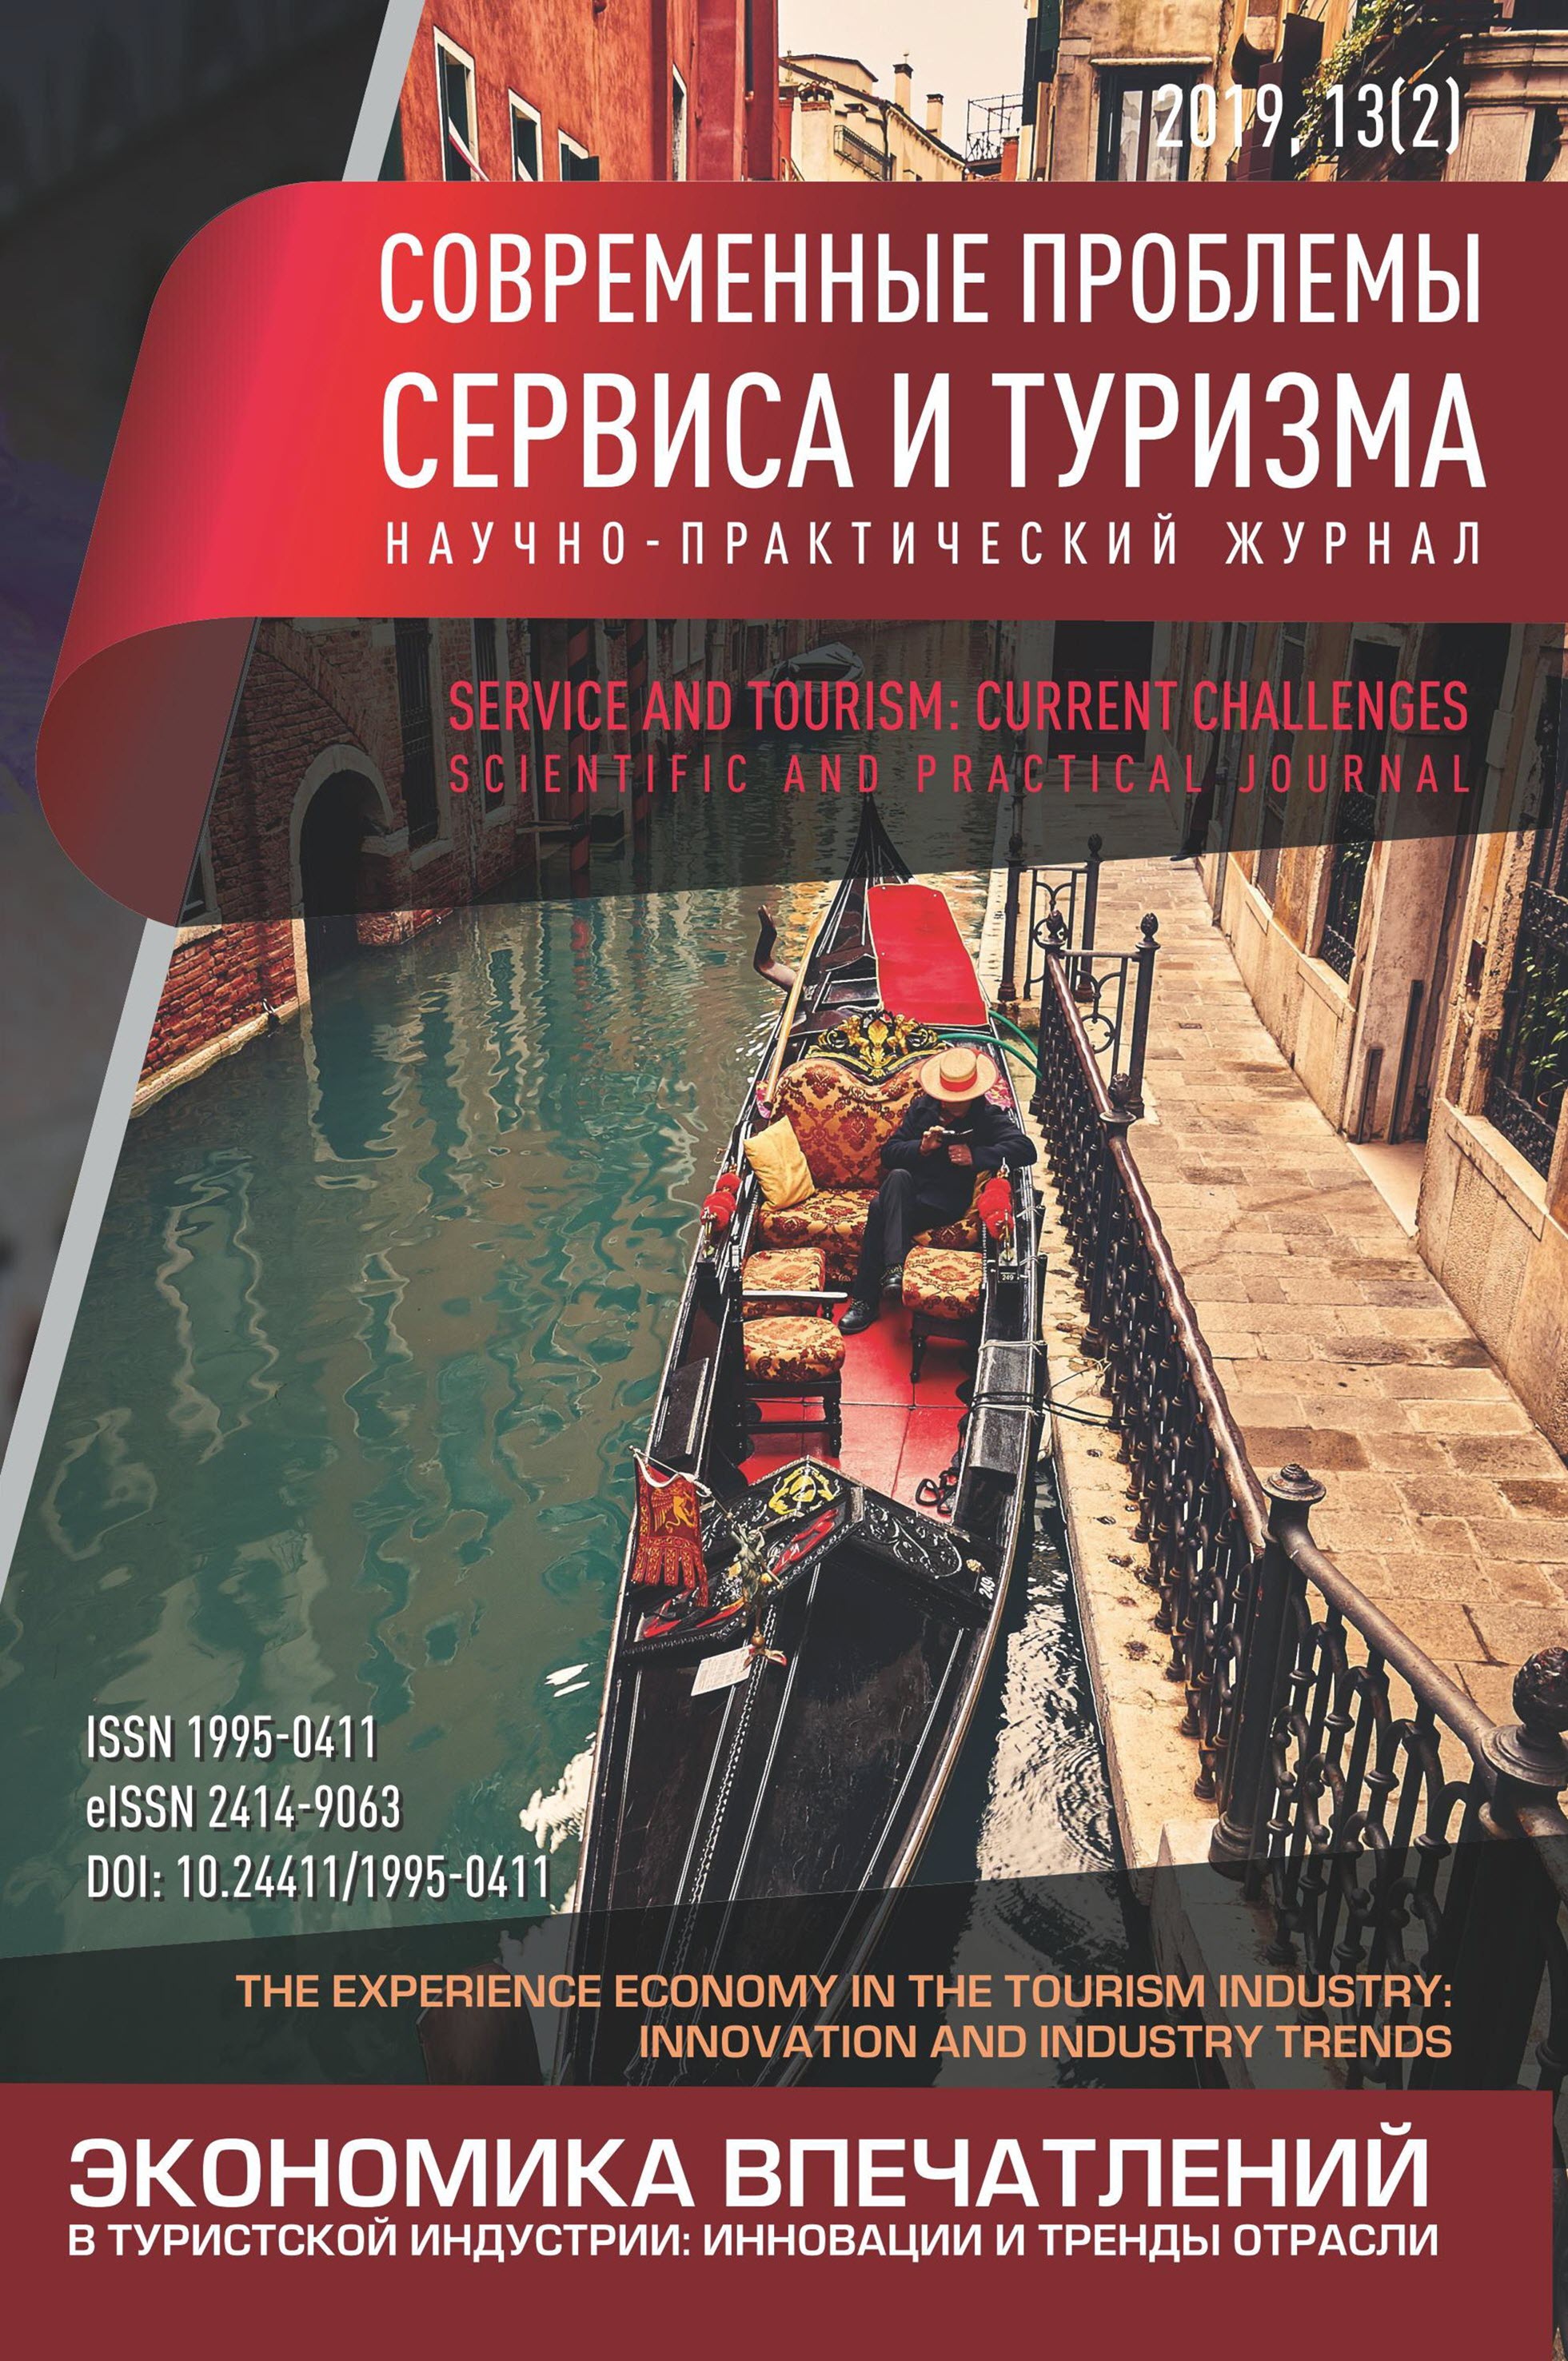 Service and Tourism: Current Challenges (STCC..